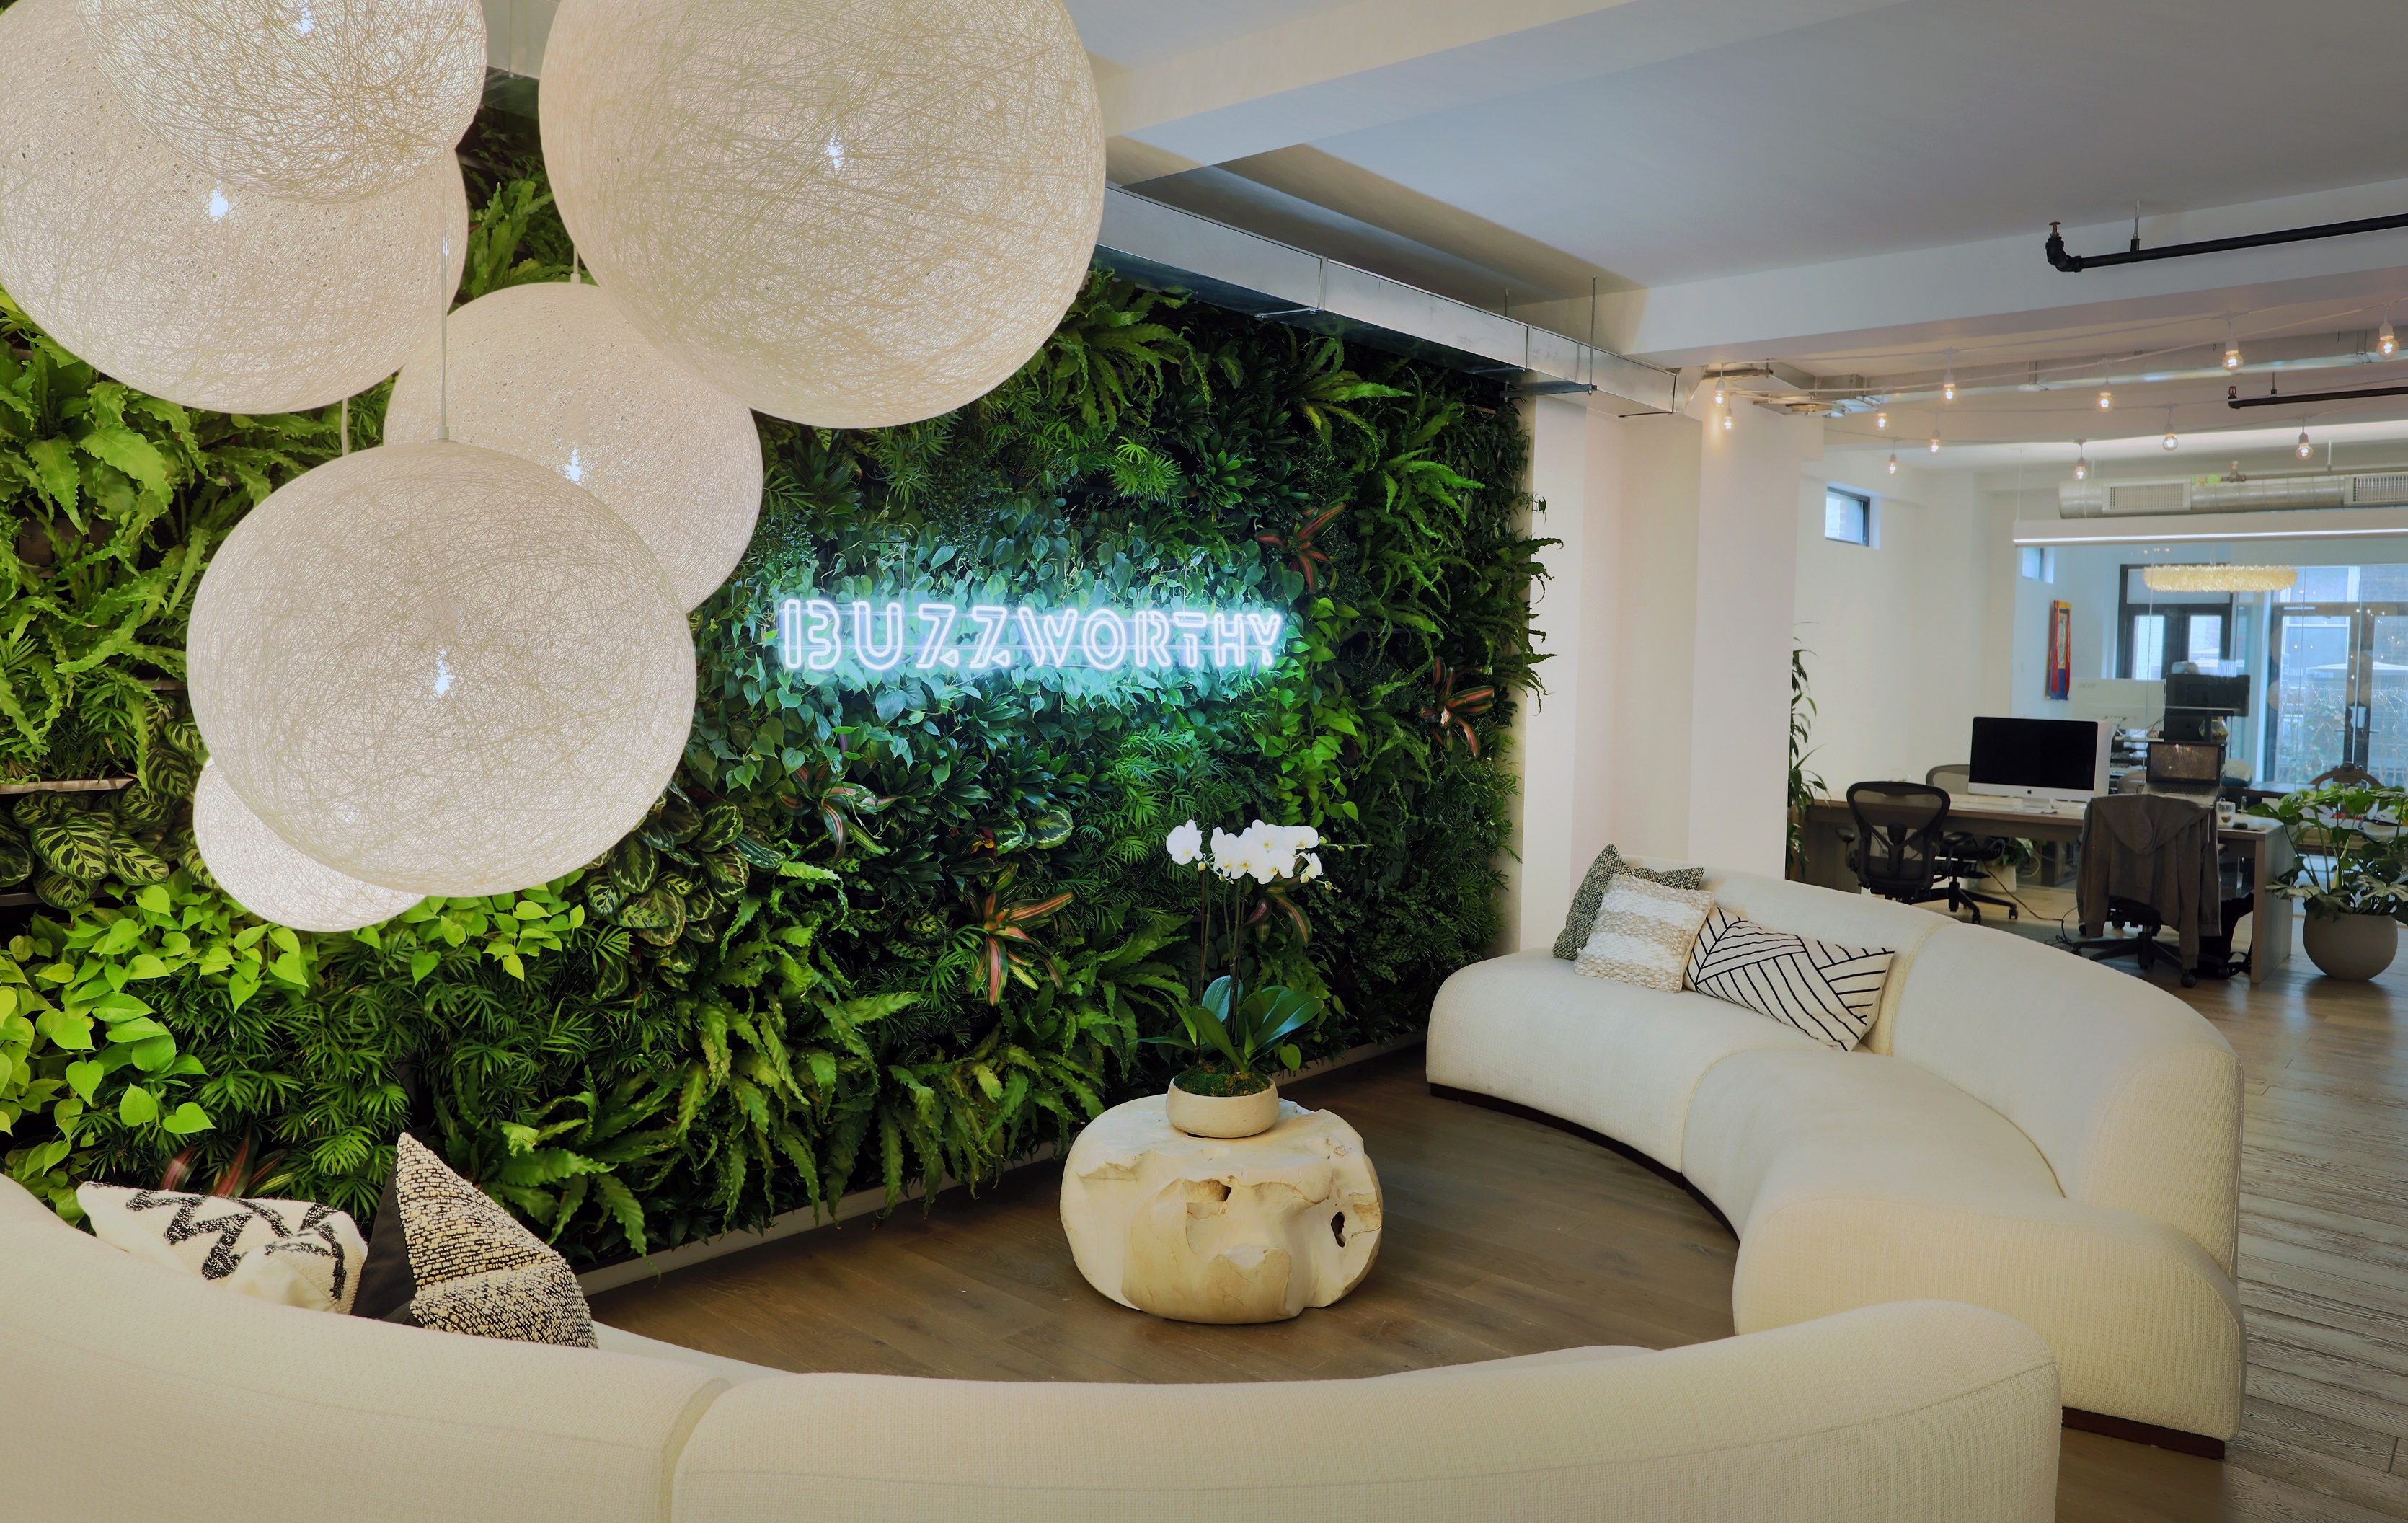 This luxurious living wall greets visitors upon entrance to the office space, nestled behind neon lettering to create a strong